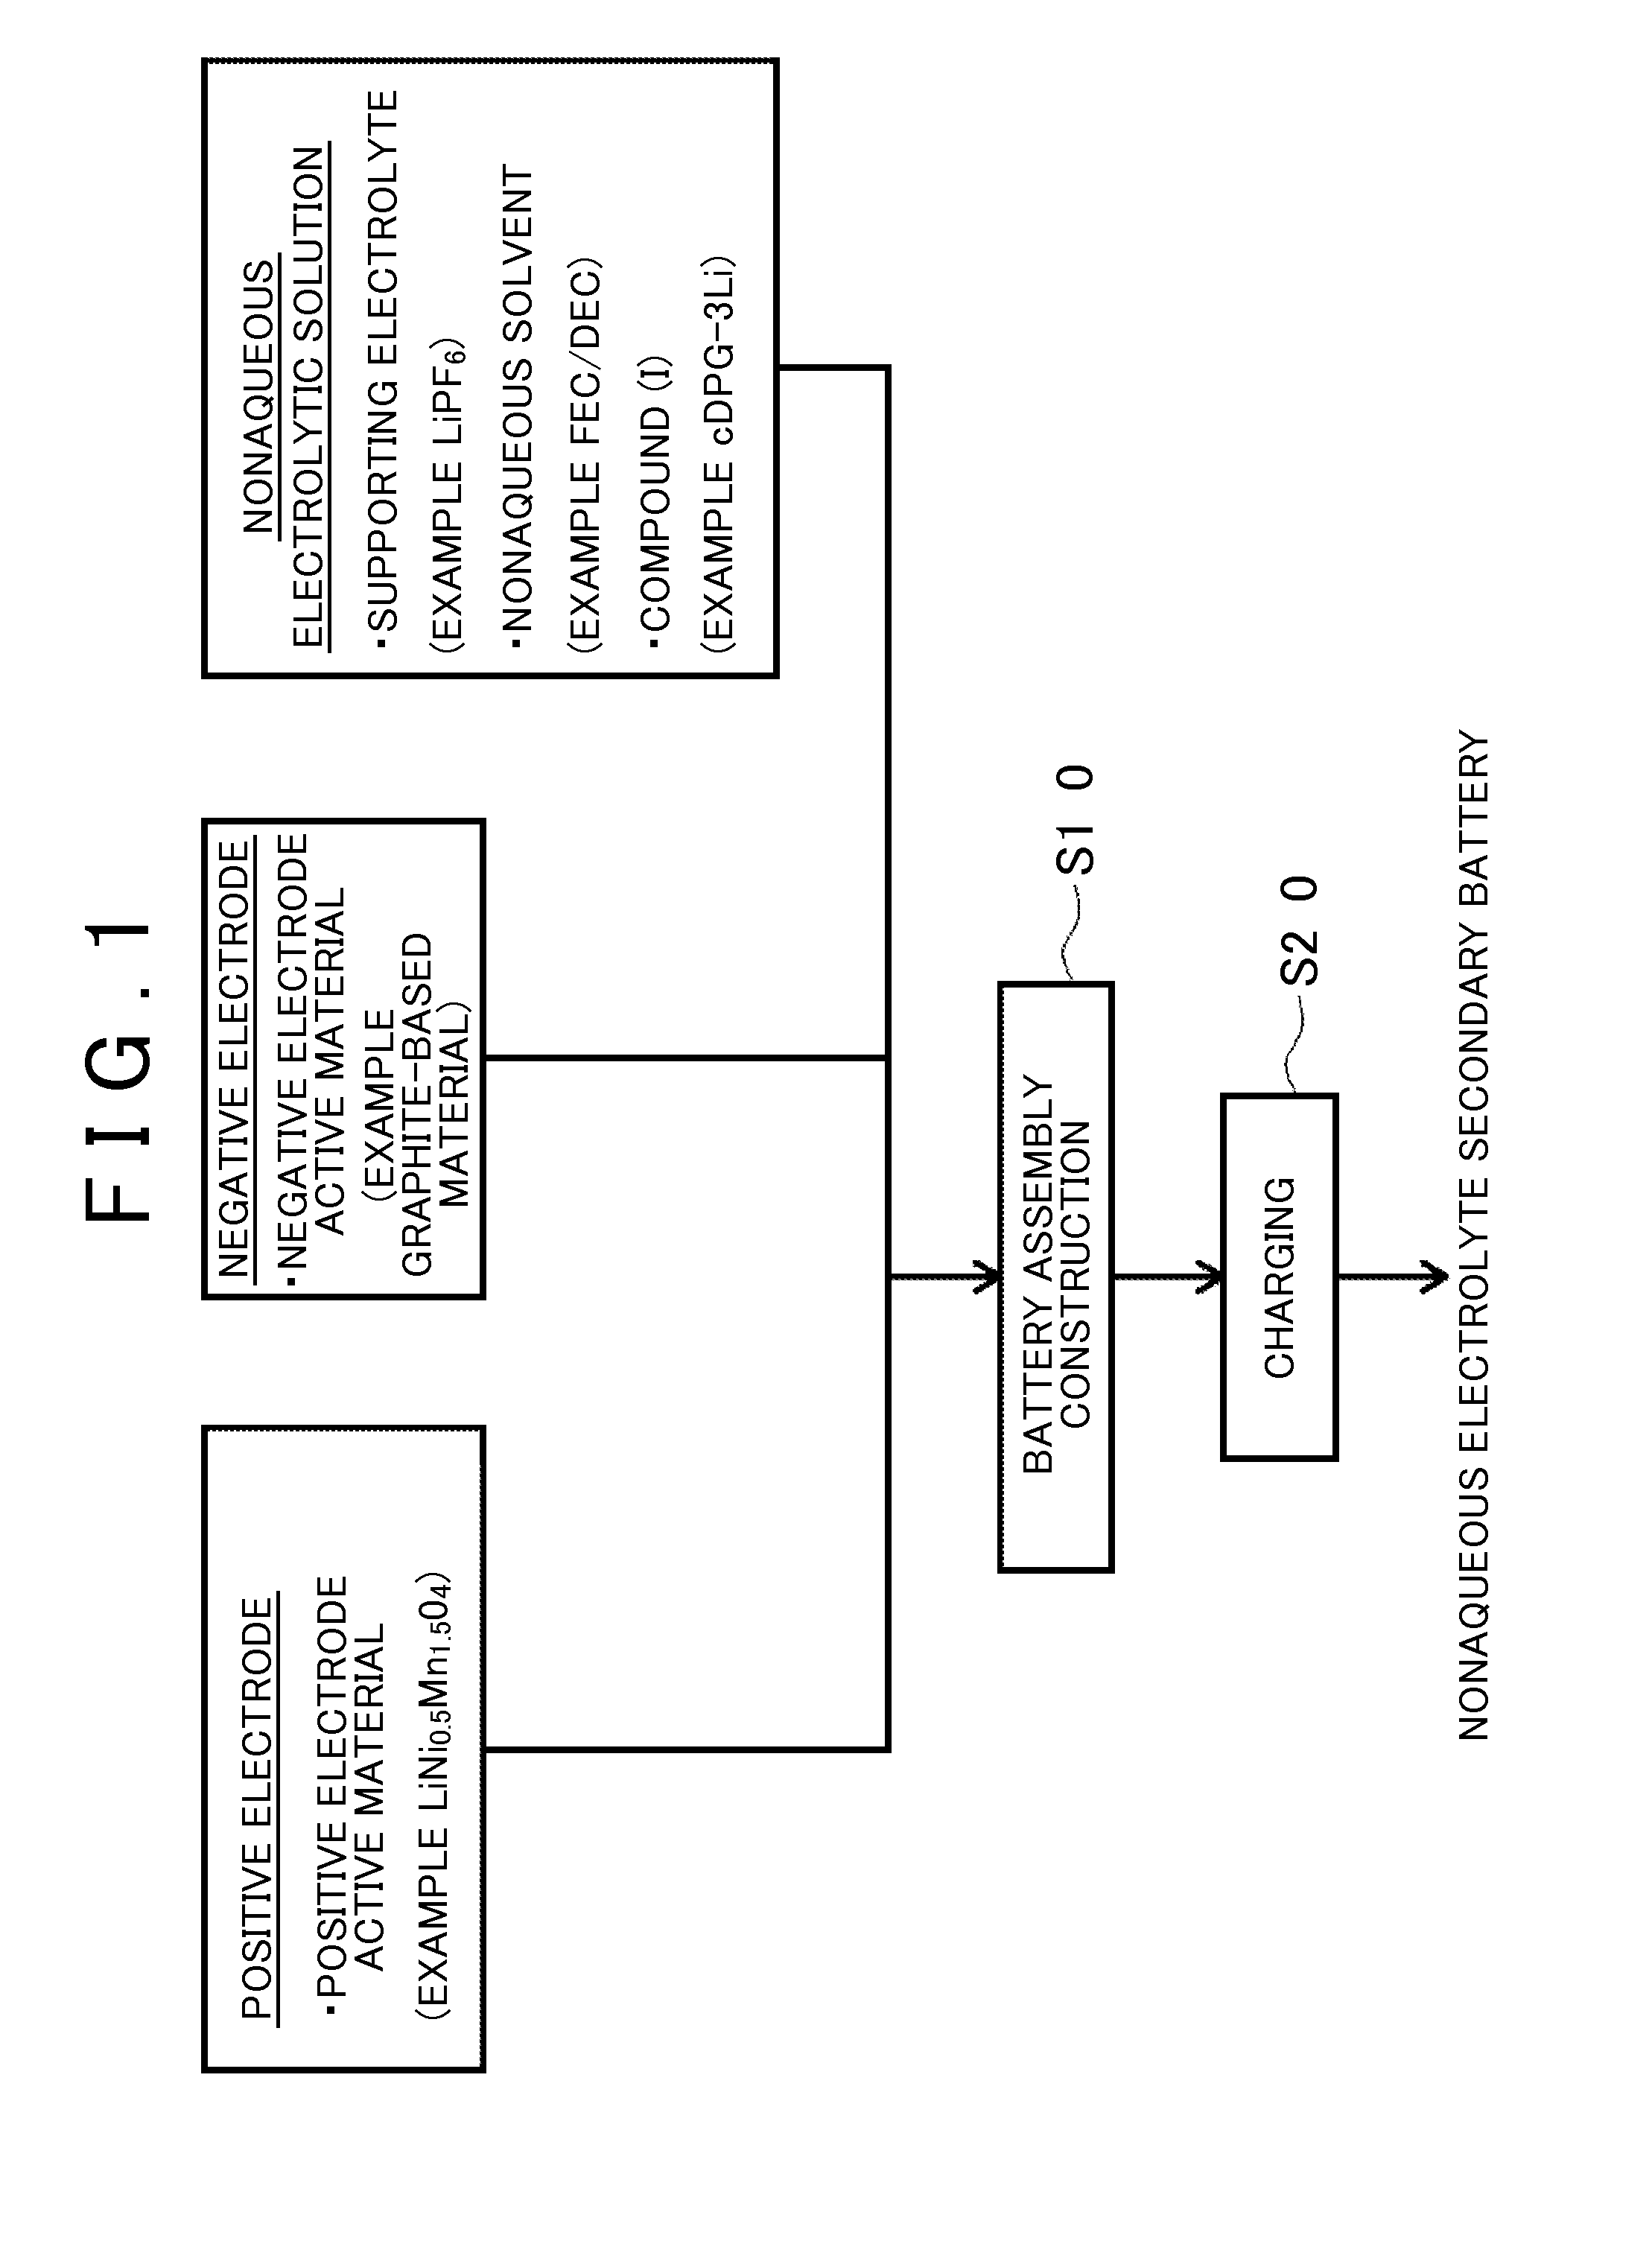 Nonaqueous electrolyte secondary battery, method of manufacturing the same, and nonaqueous electrolytic solution